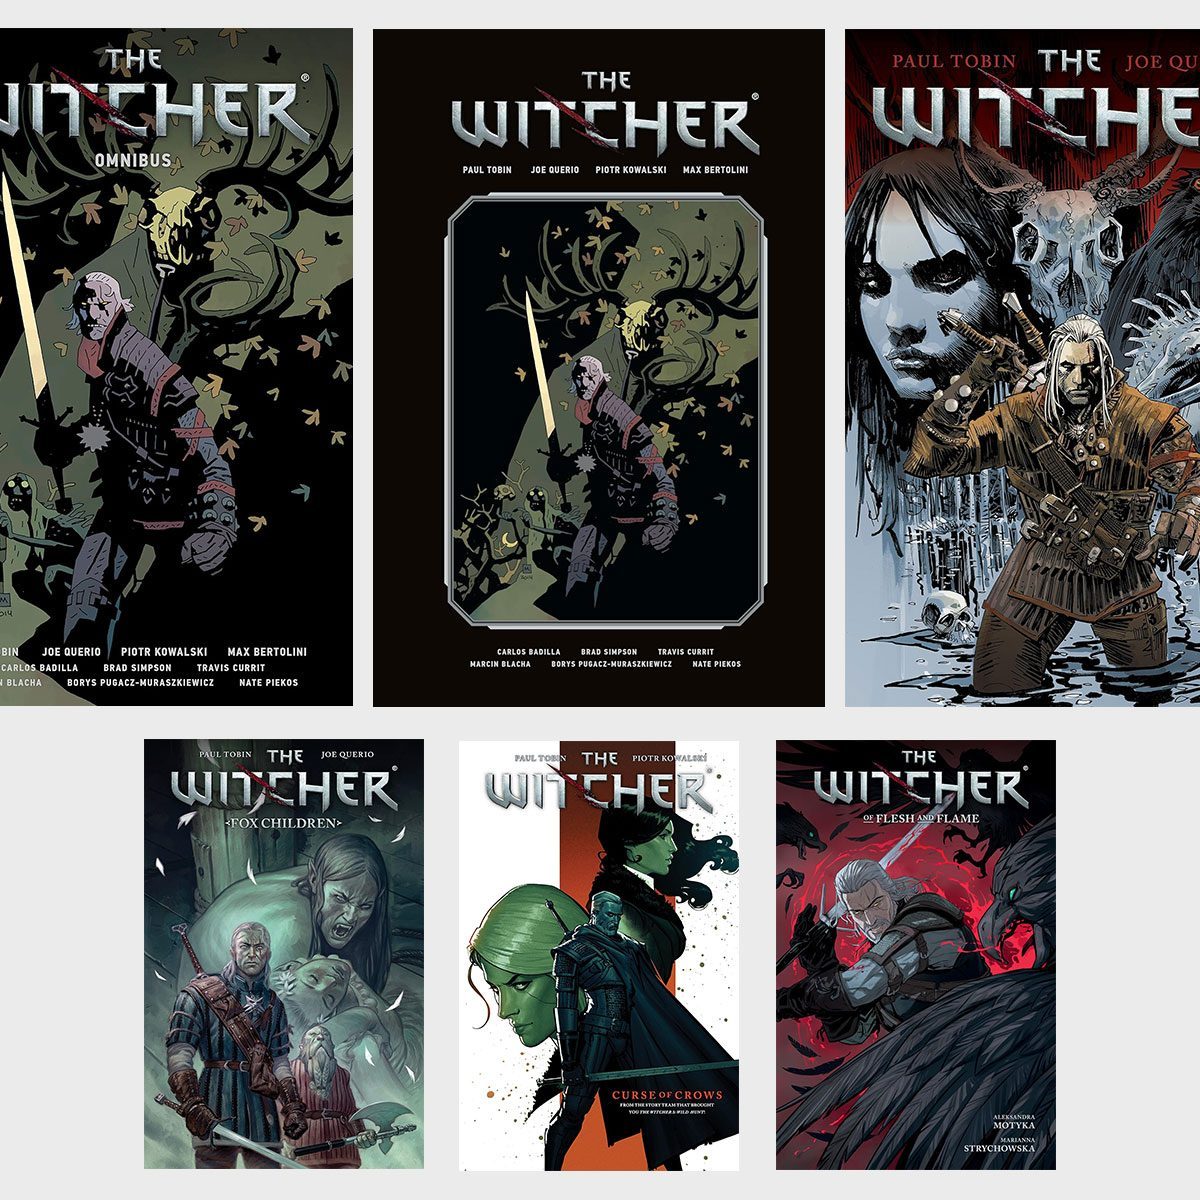 Other Works Of The Witcher To Read Ecomm Via Amazon.com